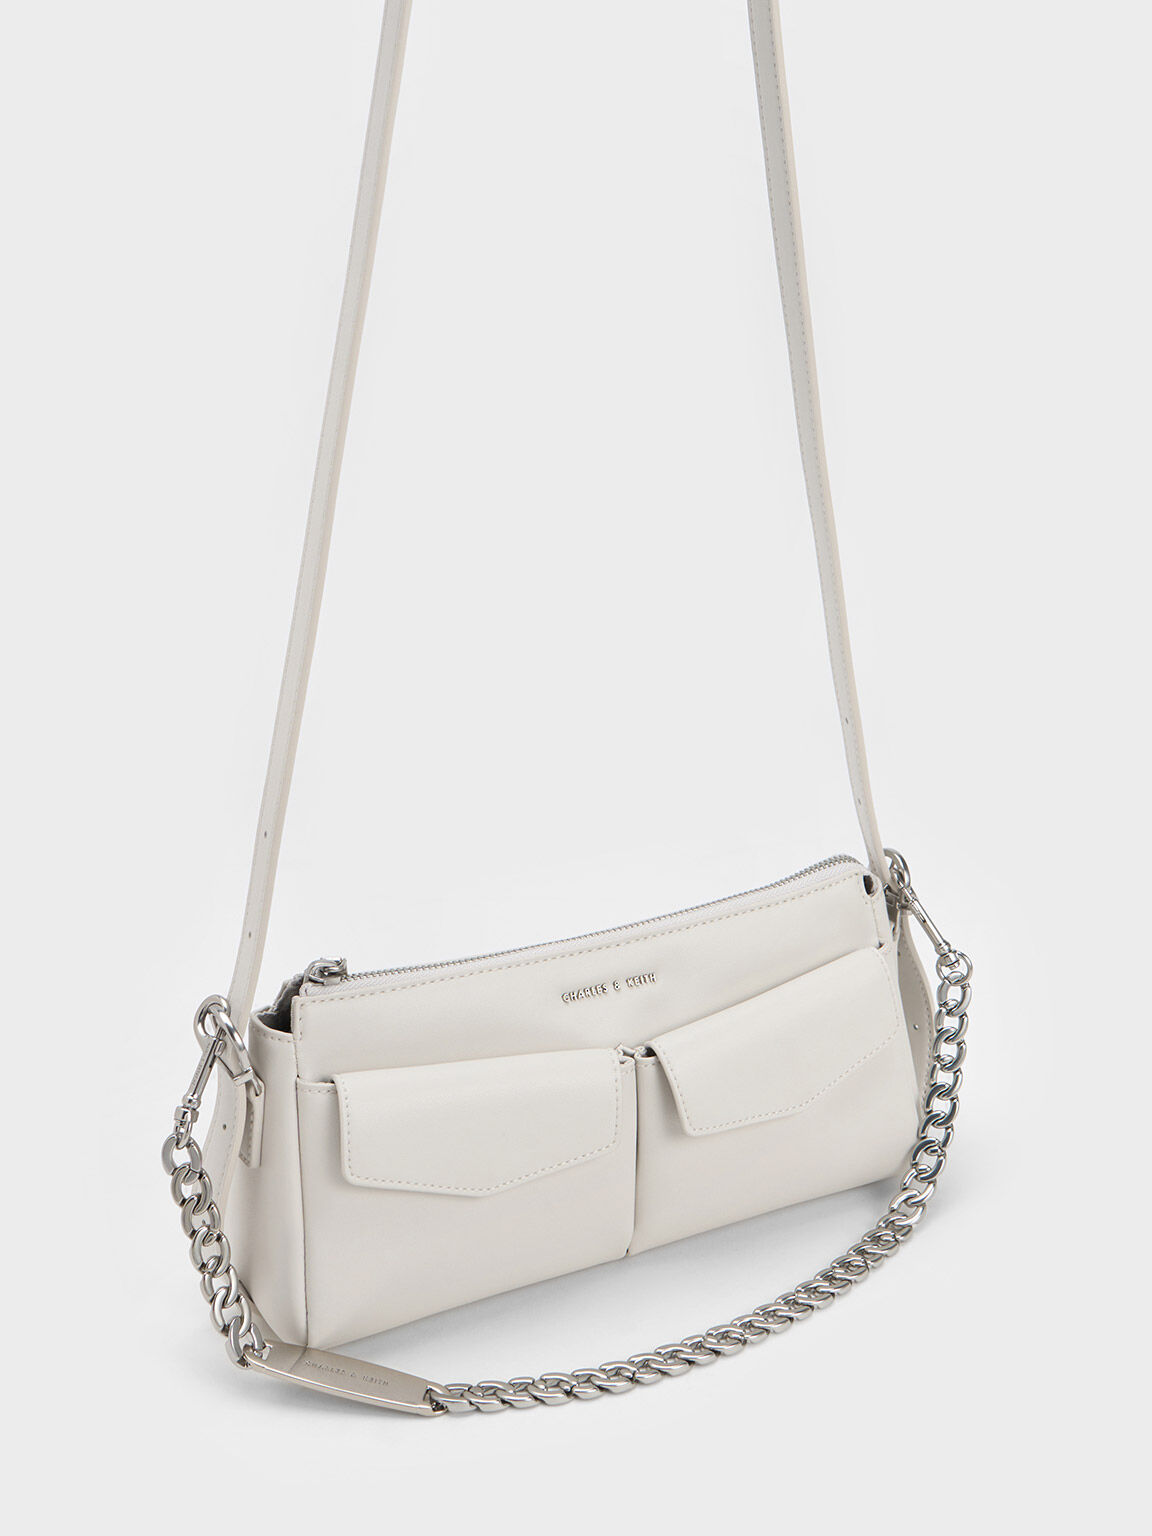 Women’s New Arrival Bags | Latest Styles | CHARLES & KEITH UK